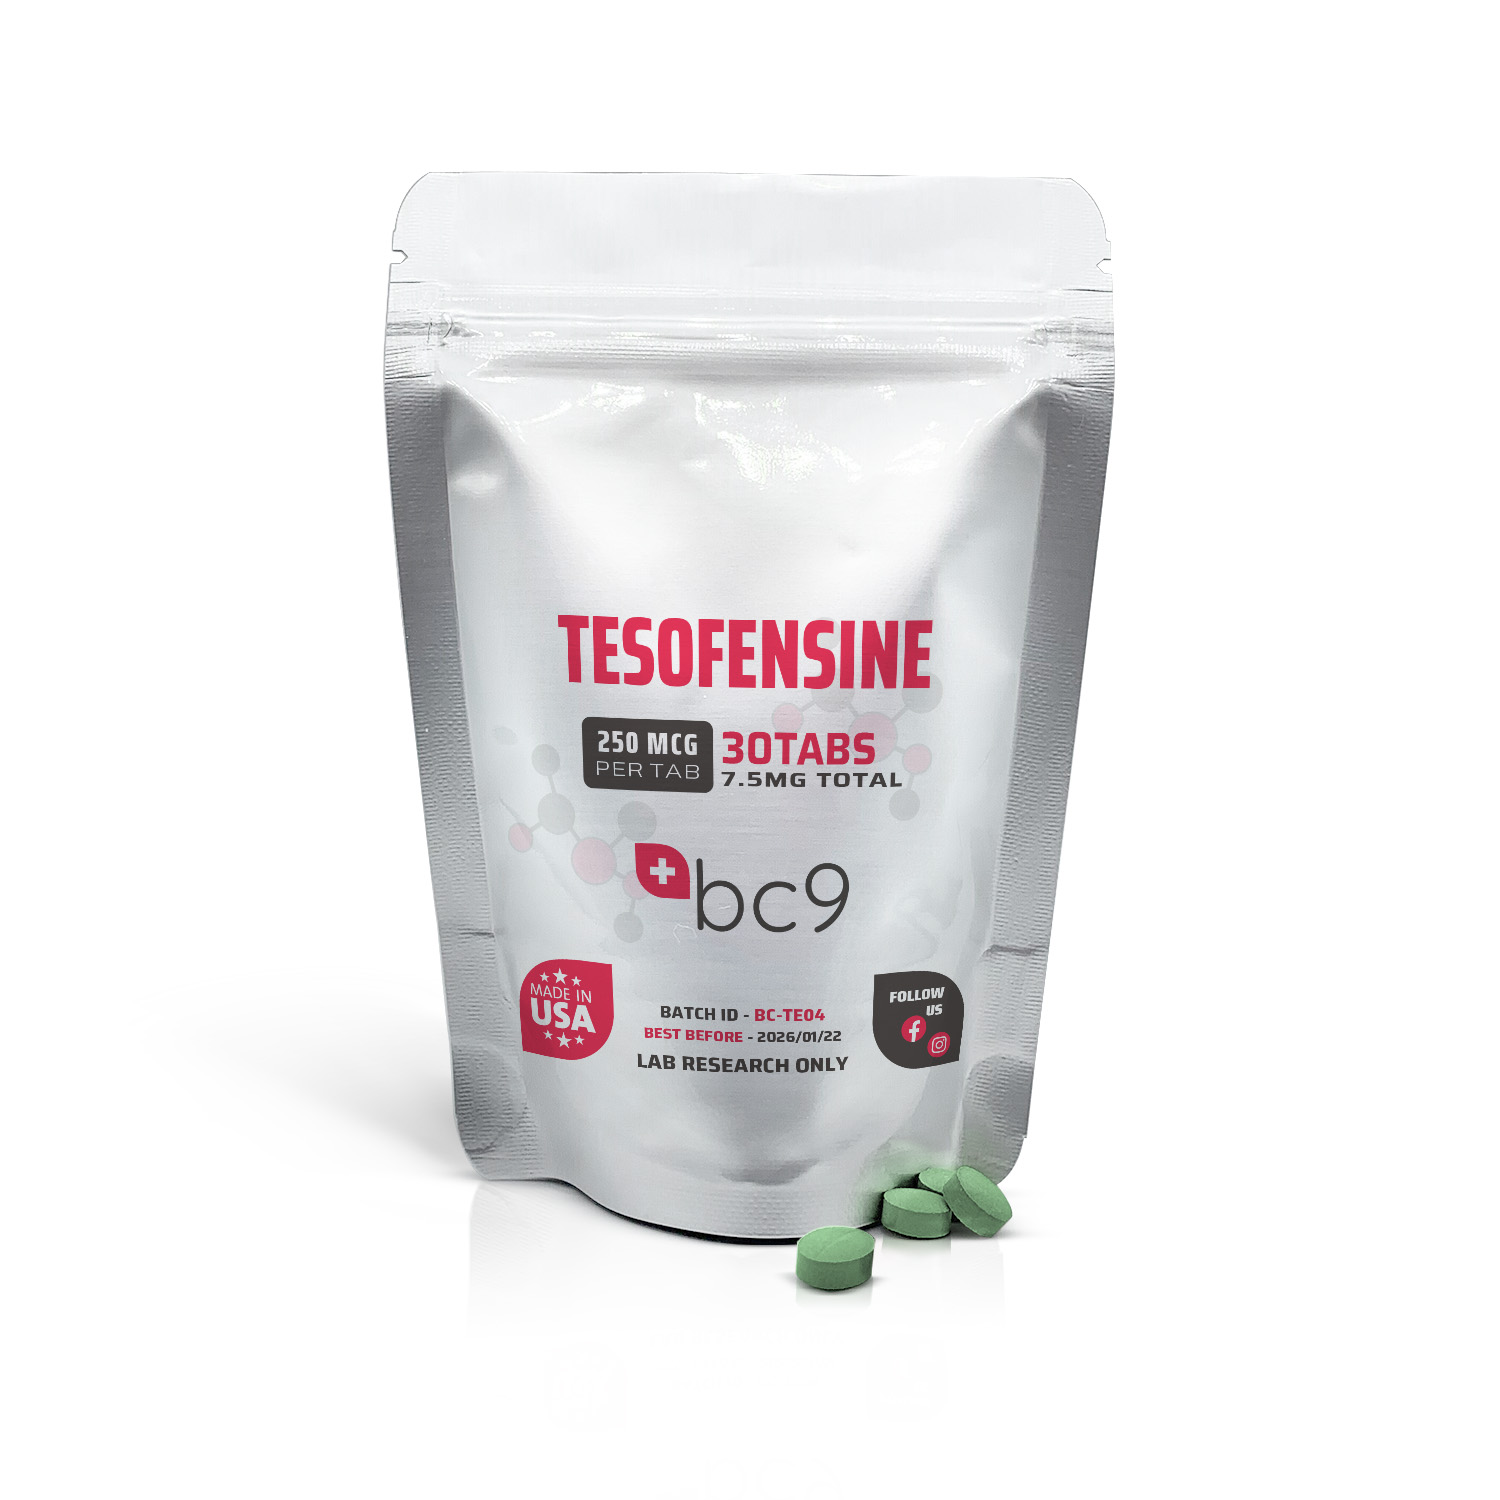 Tesofensine Tablets For Sale | Fast Shipping | BC9.org